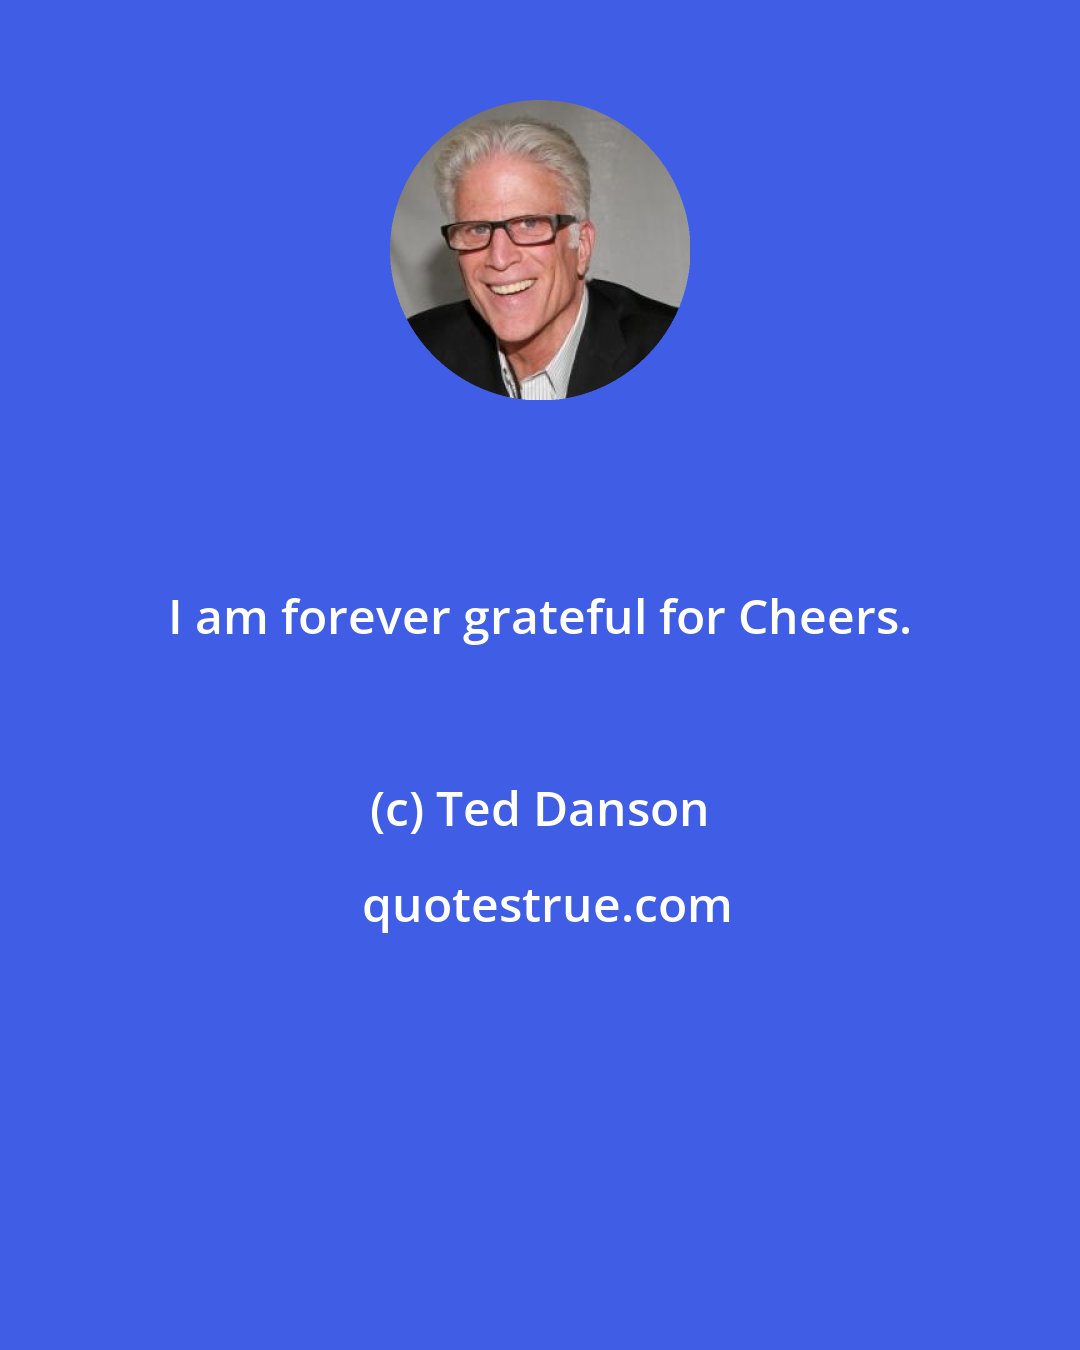 Ted Danson: I am forever grateful for Cheers.